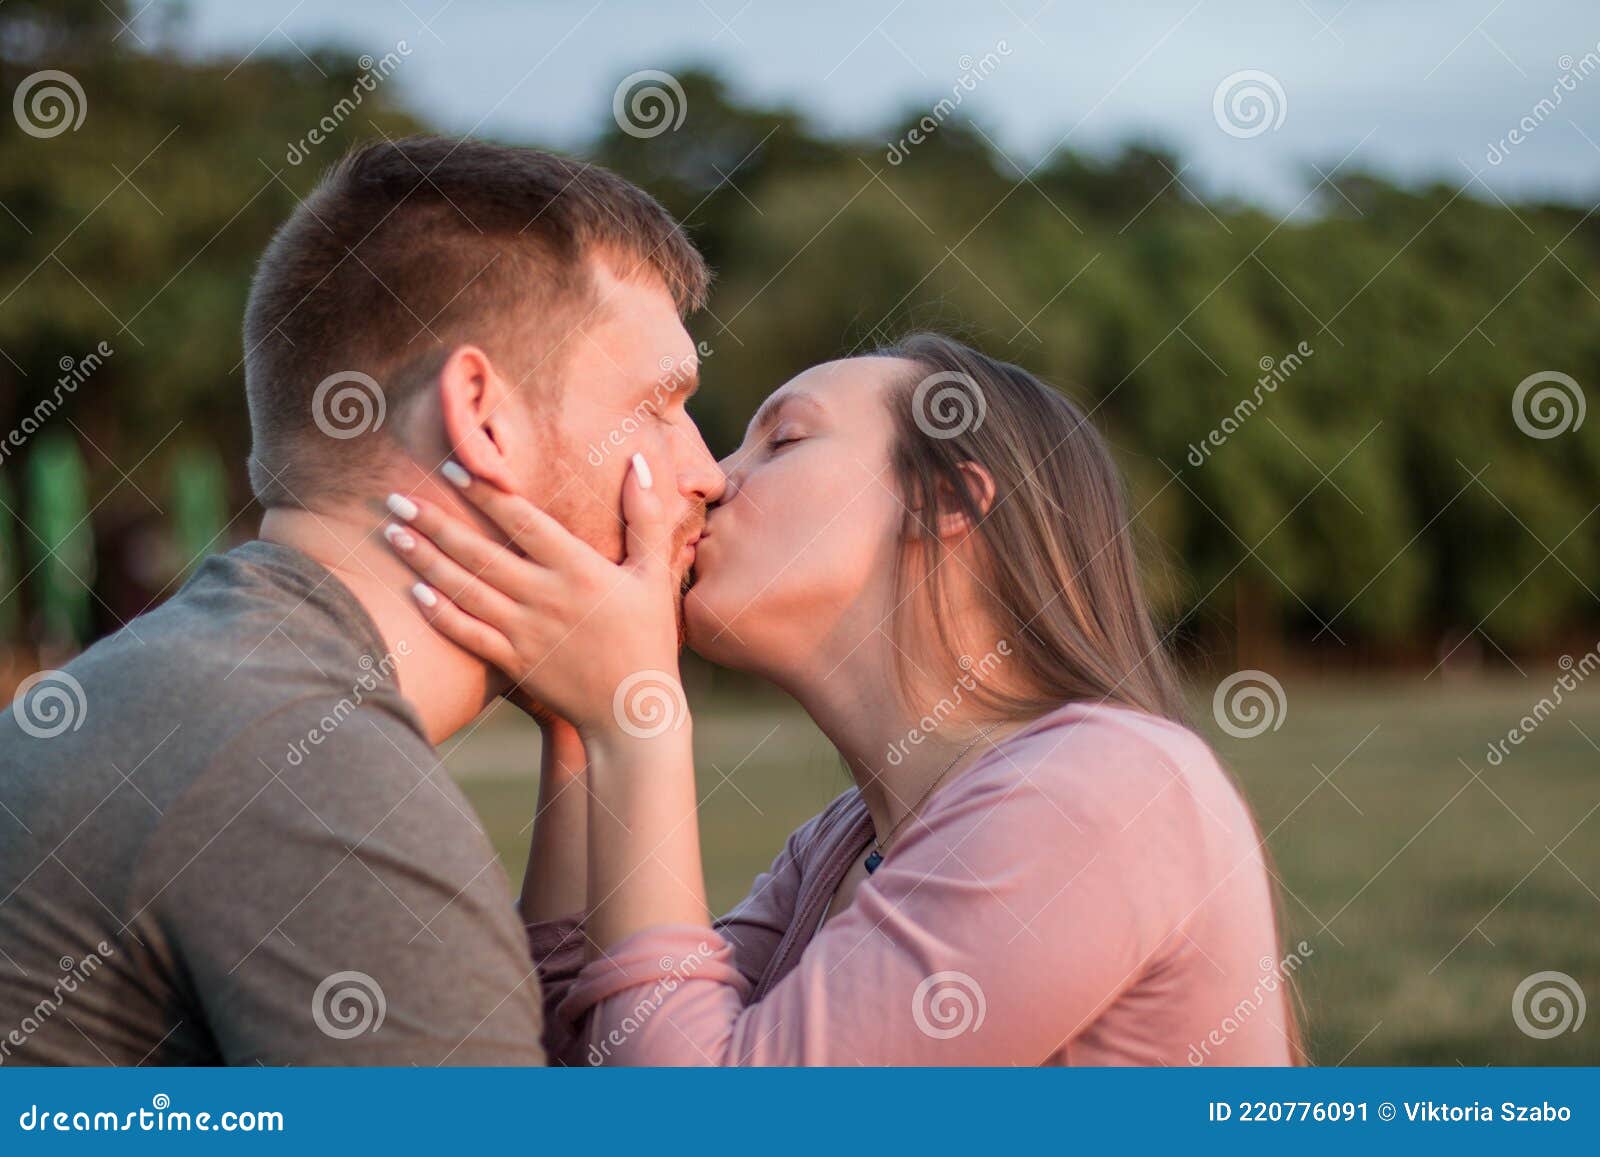 Young Couple in Love Sharing a Kiss at the Beach Stock Image pic